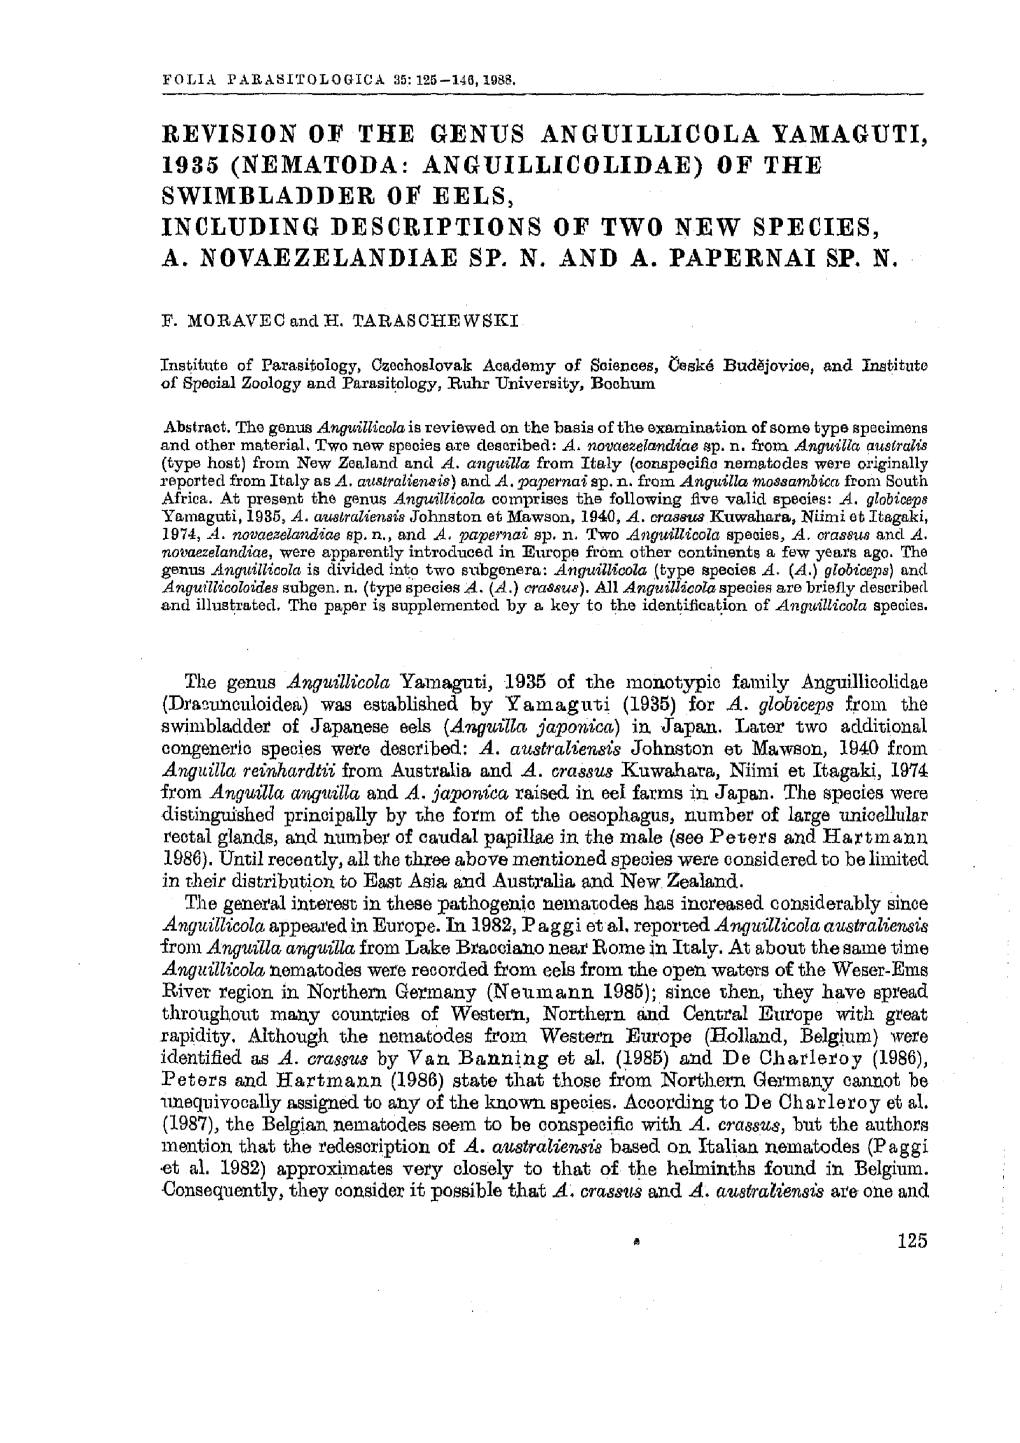 Revision of the Genus Anguillicola Yamaguti, 1935 (Nematoda: Anguillicolidae) of the Swimbladder of Eels, Including Descriptions of Two New Species, A